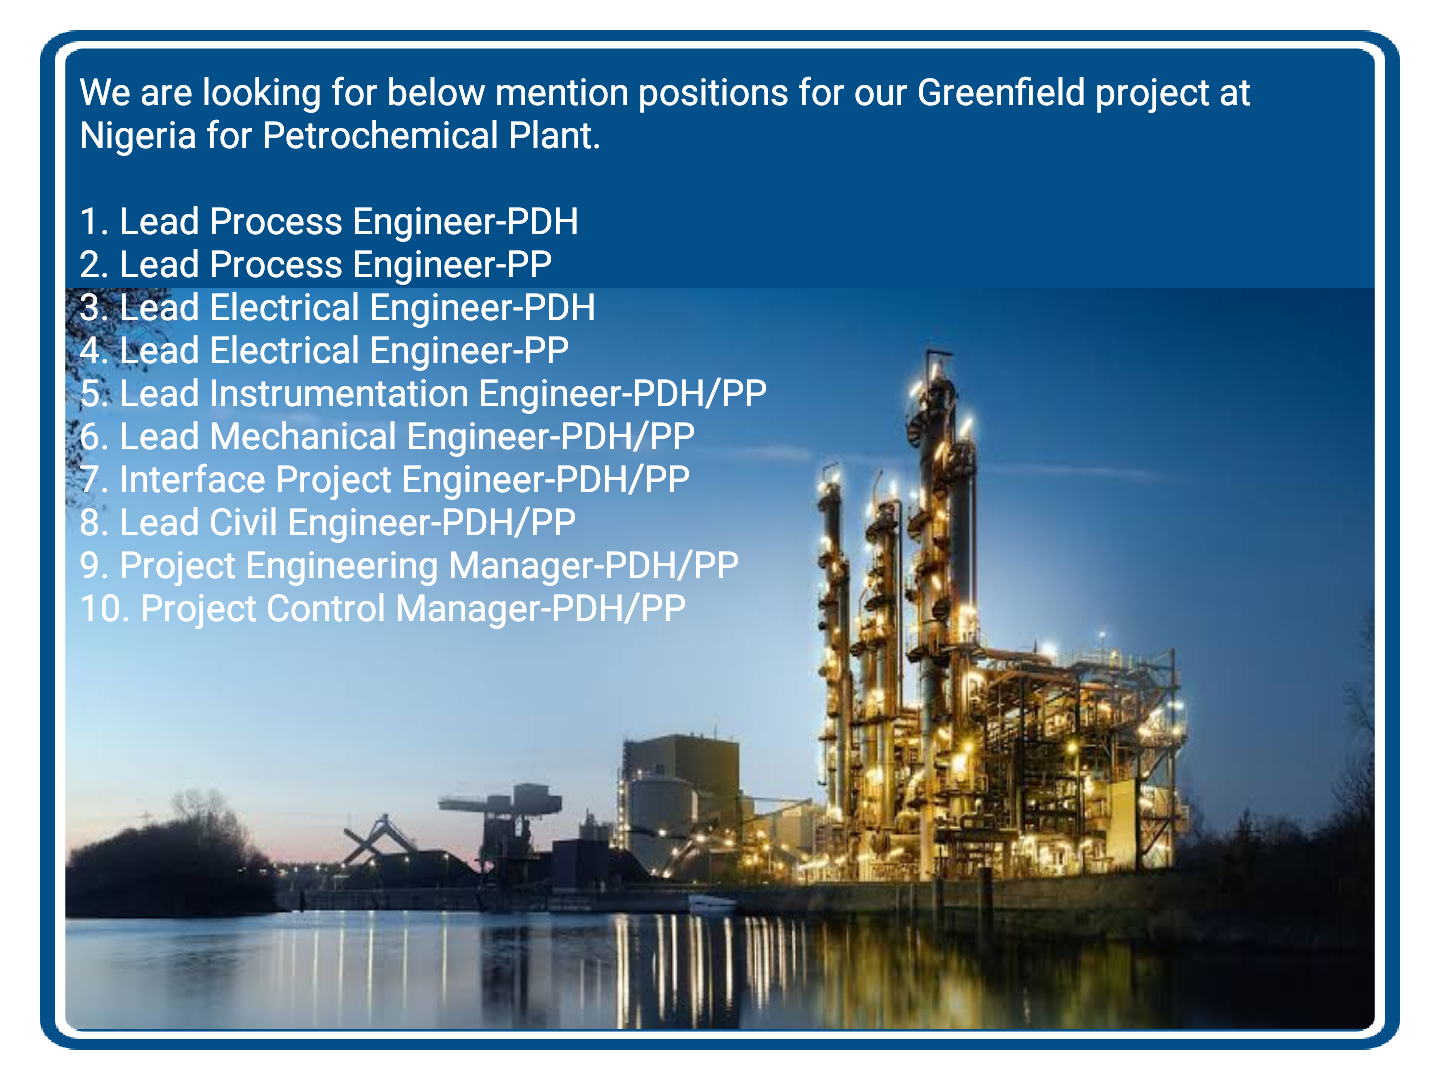 Lead Electrical, Mechanical, Process, Instrument & Civil Engineer Jobs